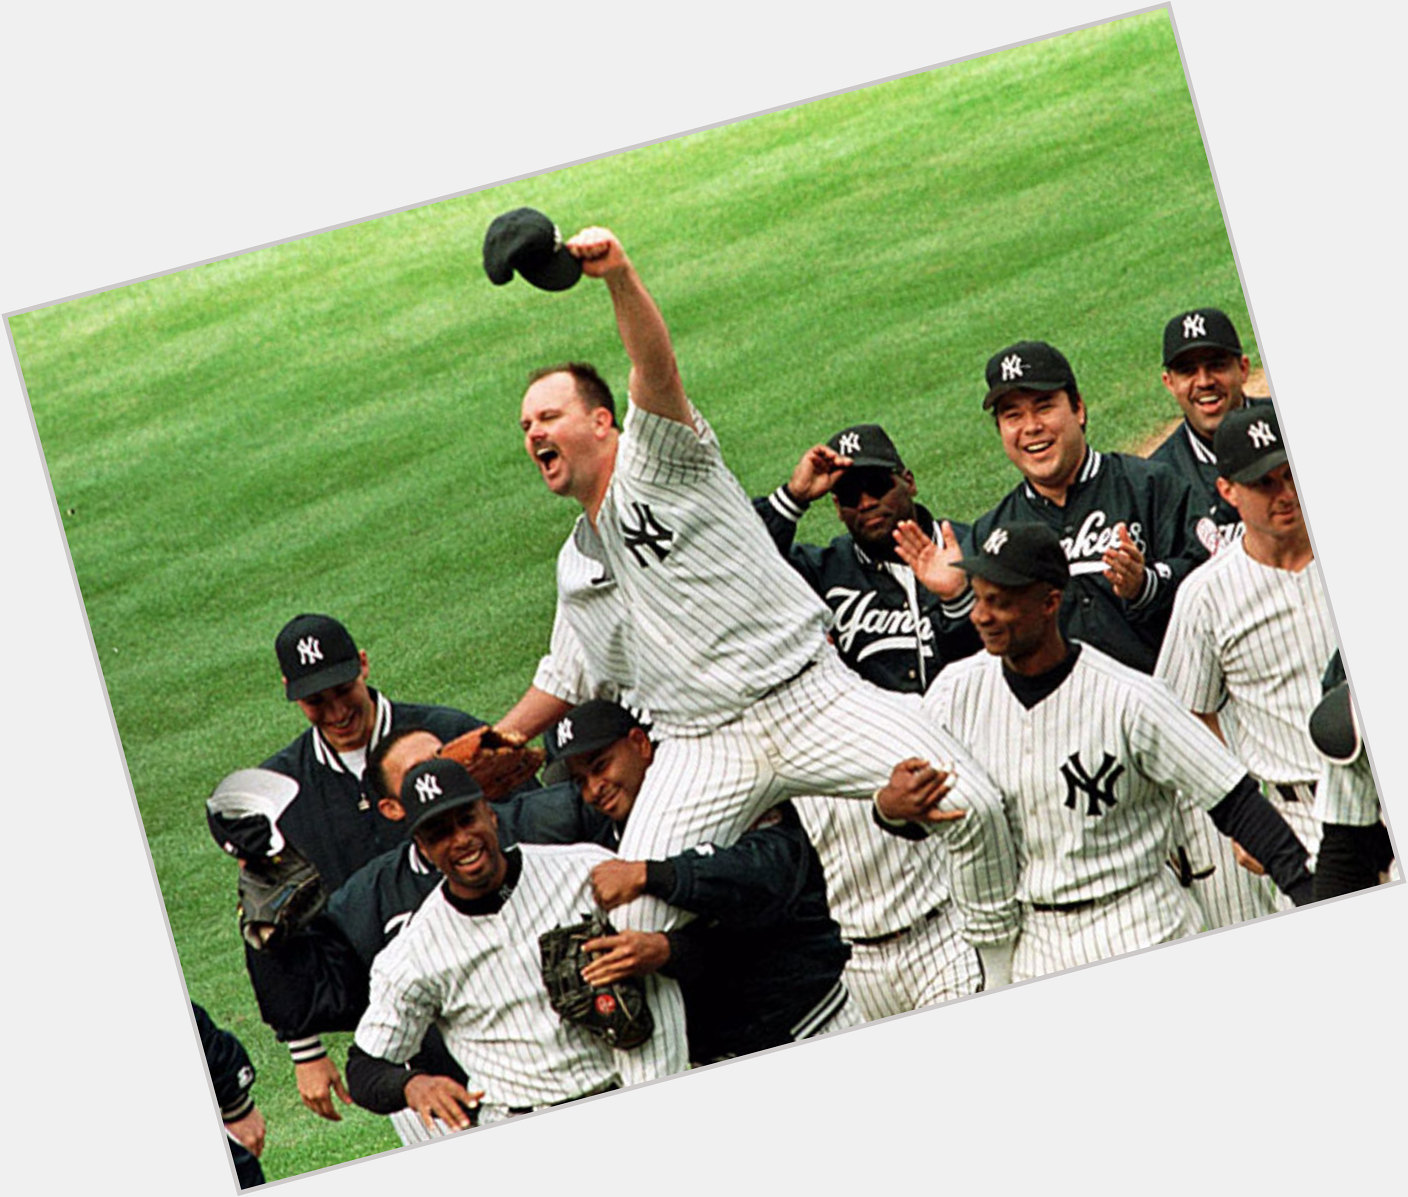 Happy birthday David Wells! 

Throw down a pitcher who threw a perfect game or a no hitter! 